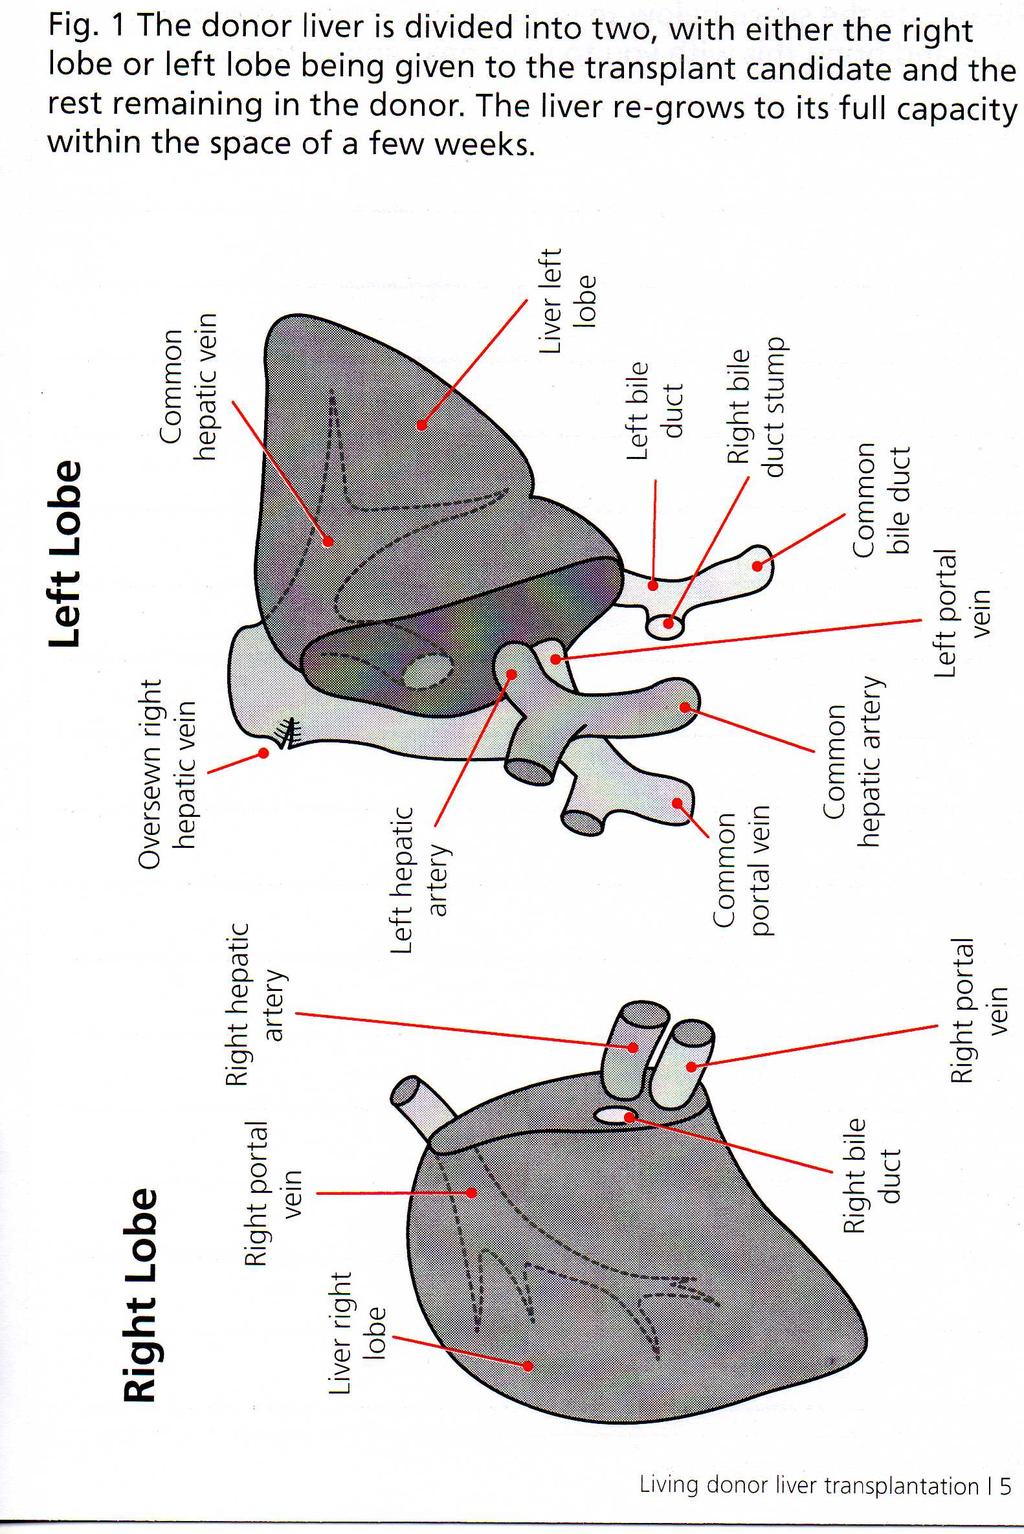 Fig. 1 The donor liver is divided into two, with either the right lobe or left lobe being given to the transplant candidate and the rest remaining in the donor.